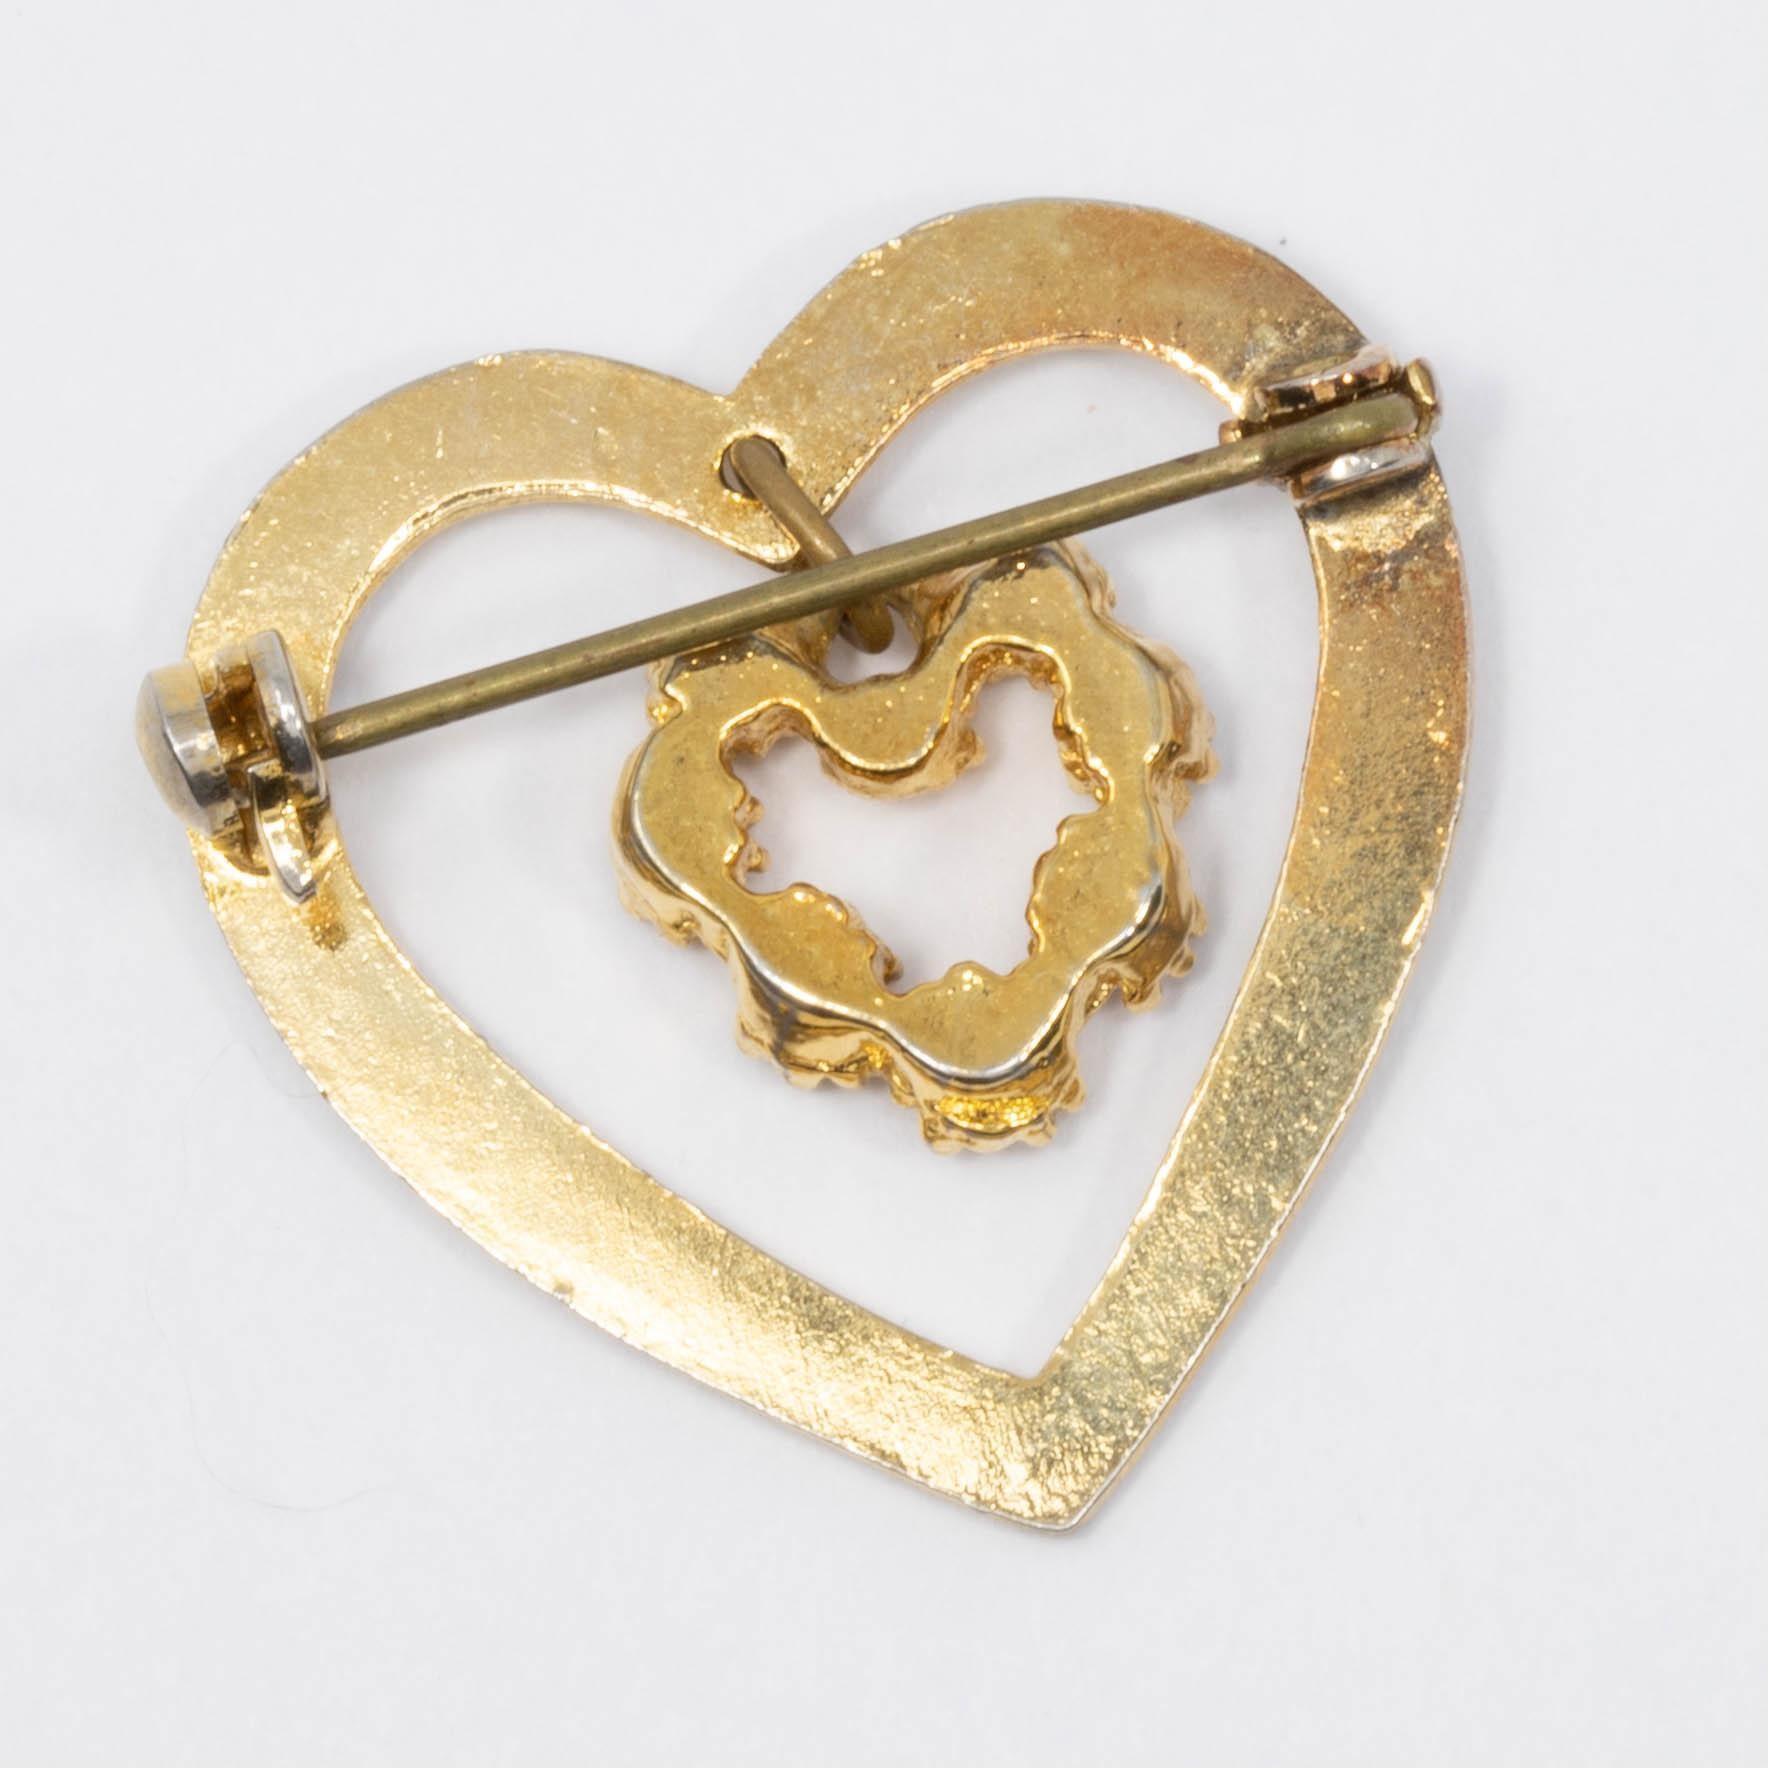 Double Heart Charm Dangling Crystal Pin Brooch in Gold, Mid 1900s In Good Condition For Sale In Milford, DE